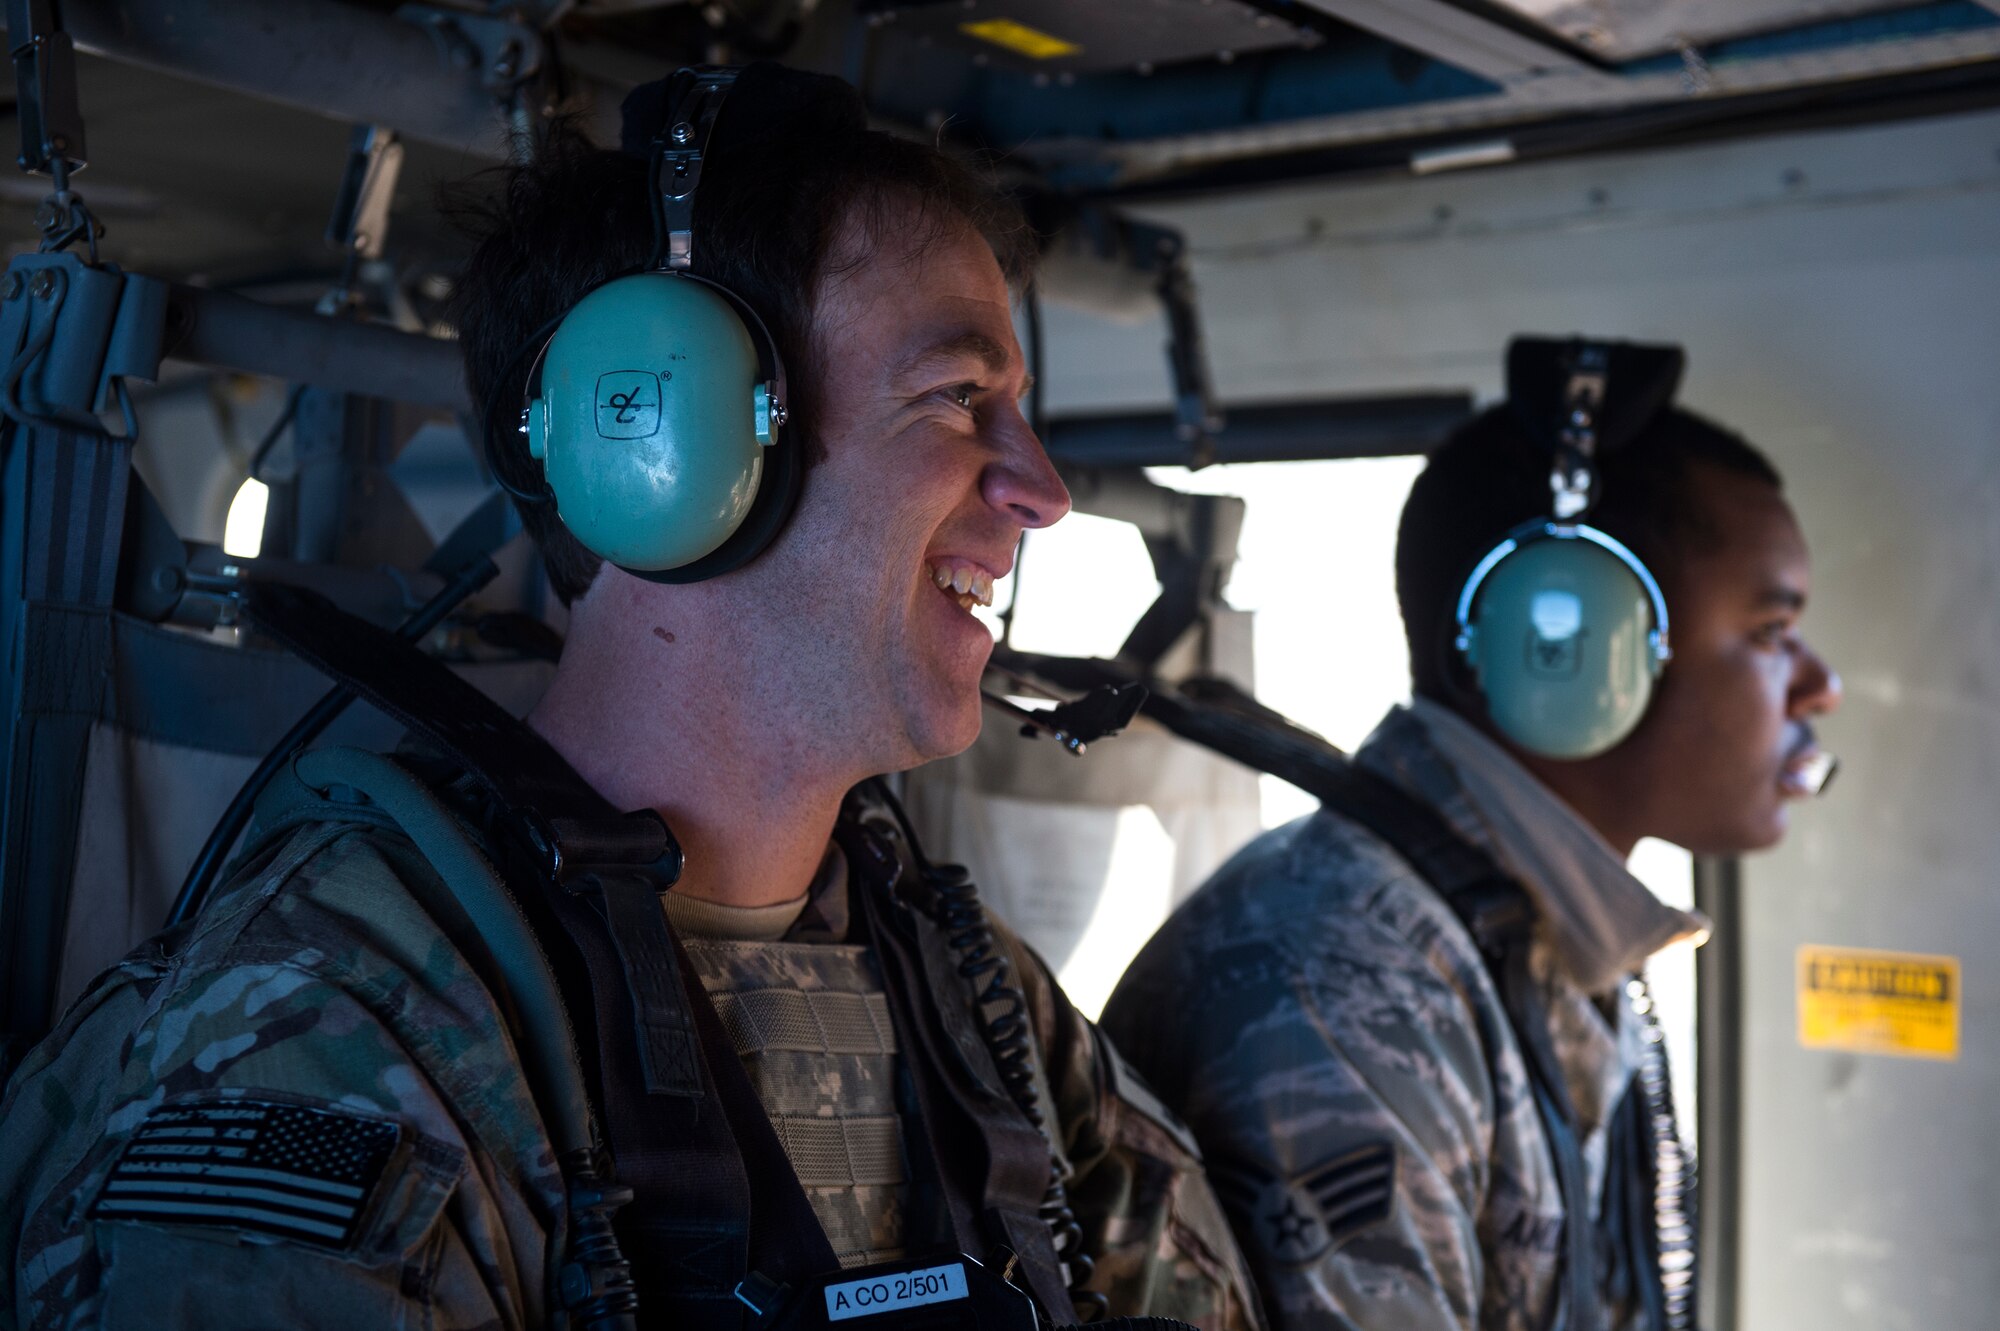 U.S. Air Force Master Sgt. Joel McPherson, 7th Air Support Operations Squadron uperintendent, shares a laugh with crewmembers, while traveling to the Oro Grande Training Complex in a U.S. Army Sikorsky UH-60 Black Hawk for the joint exercise, Iron Focus, Feb. 4, 2016. After completing Iron Focus, Army and Air Force units will head to the National Training Center in Fort Irwin, Calif. for four weeks prior to heading to their deployed location. (U.S. Air Force photo by Senior Airman Olivia Dominique/Released)